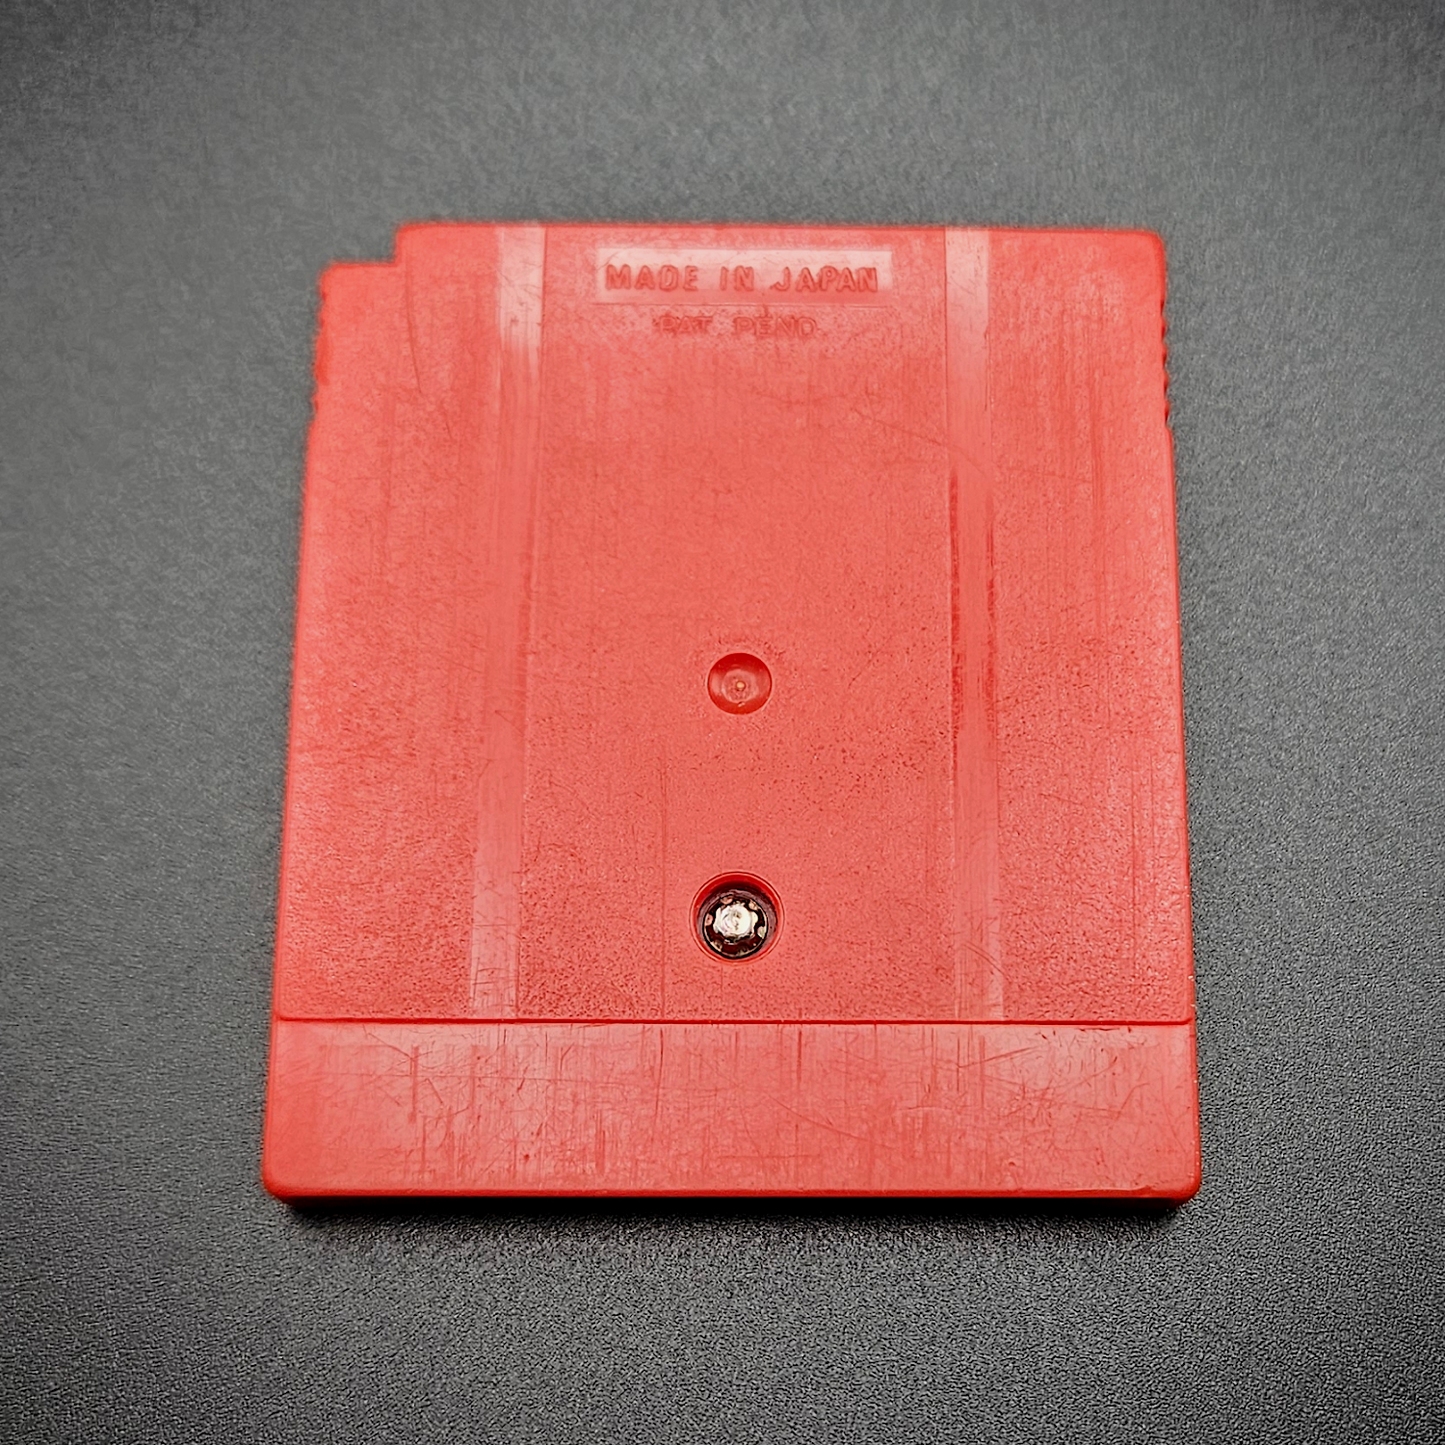 OUTLET - "Pokemon Red Version" Gameboy game cartridge